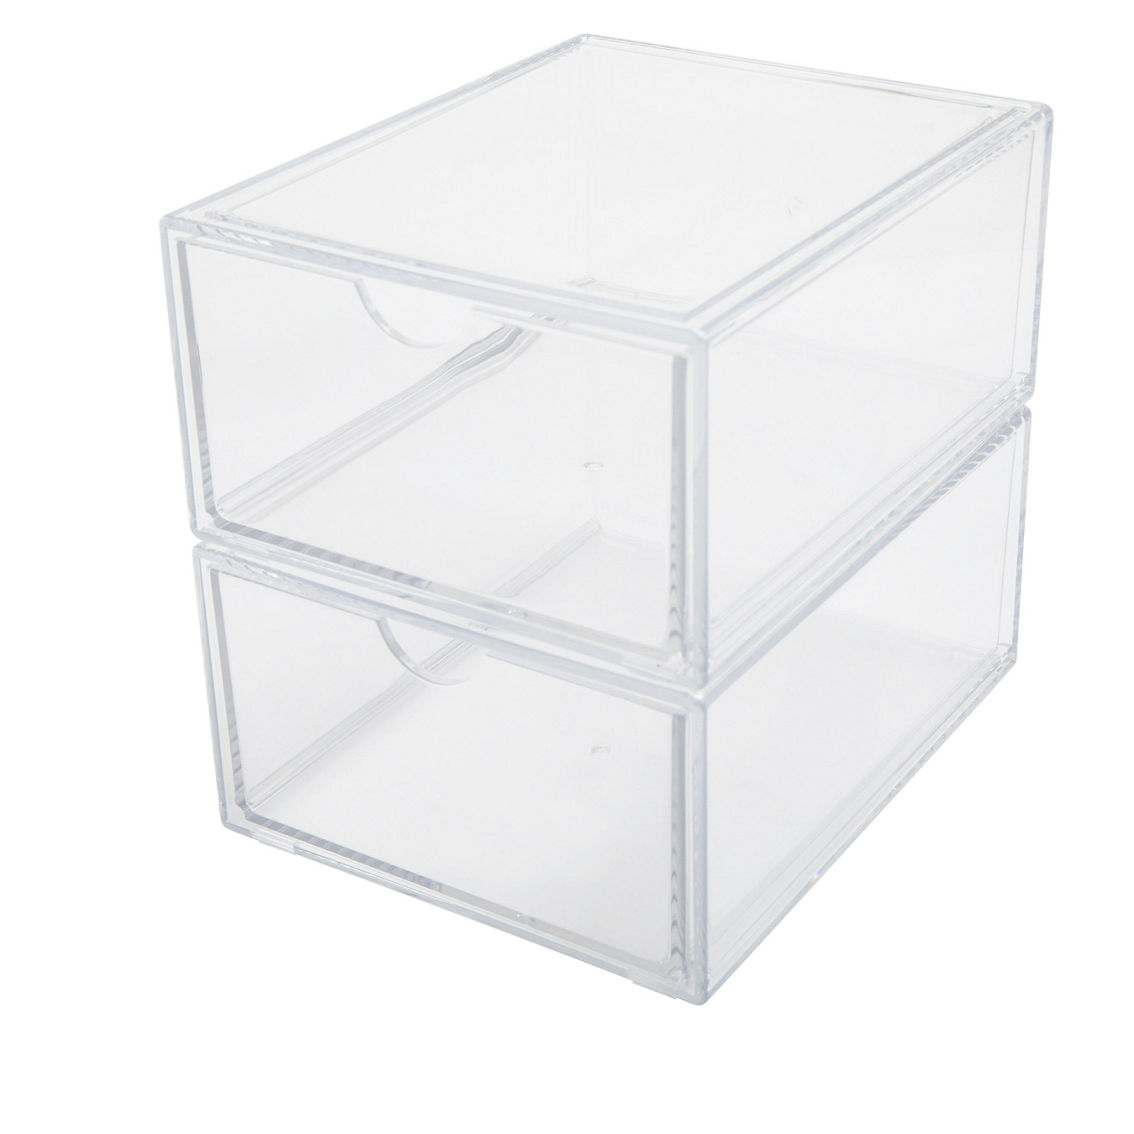 Martha Stewart 2PK Plastic Desk Boxes with Pullout Drawers - Image 2 of 5